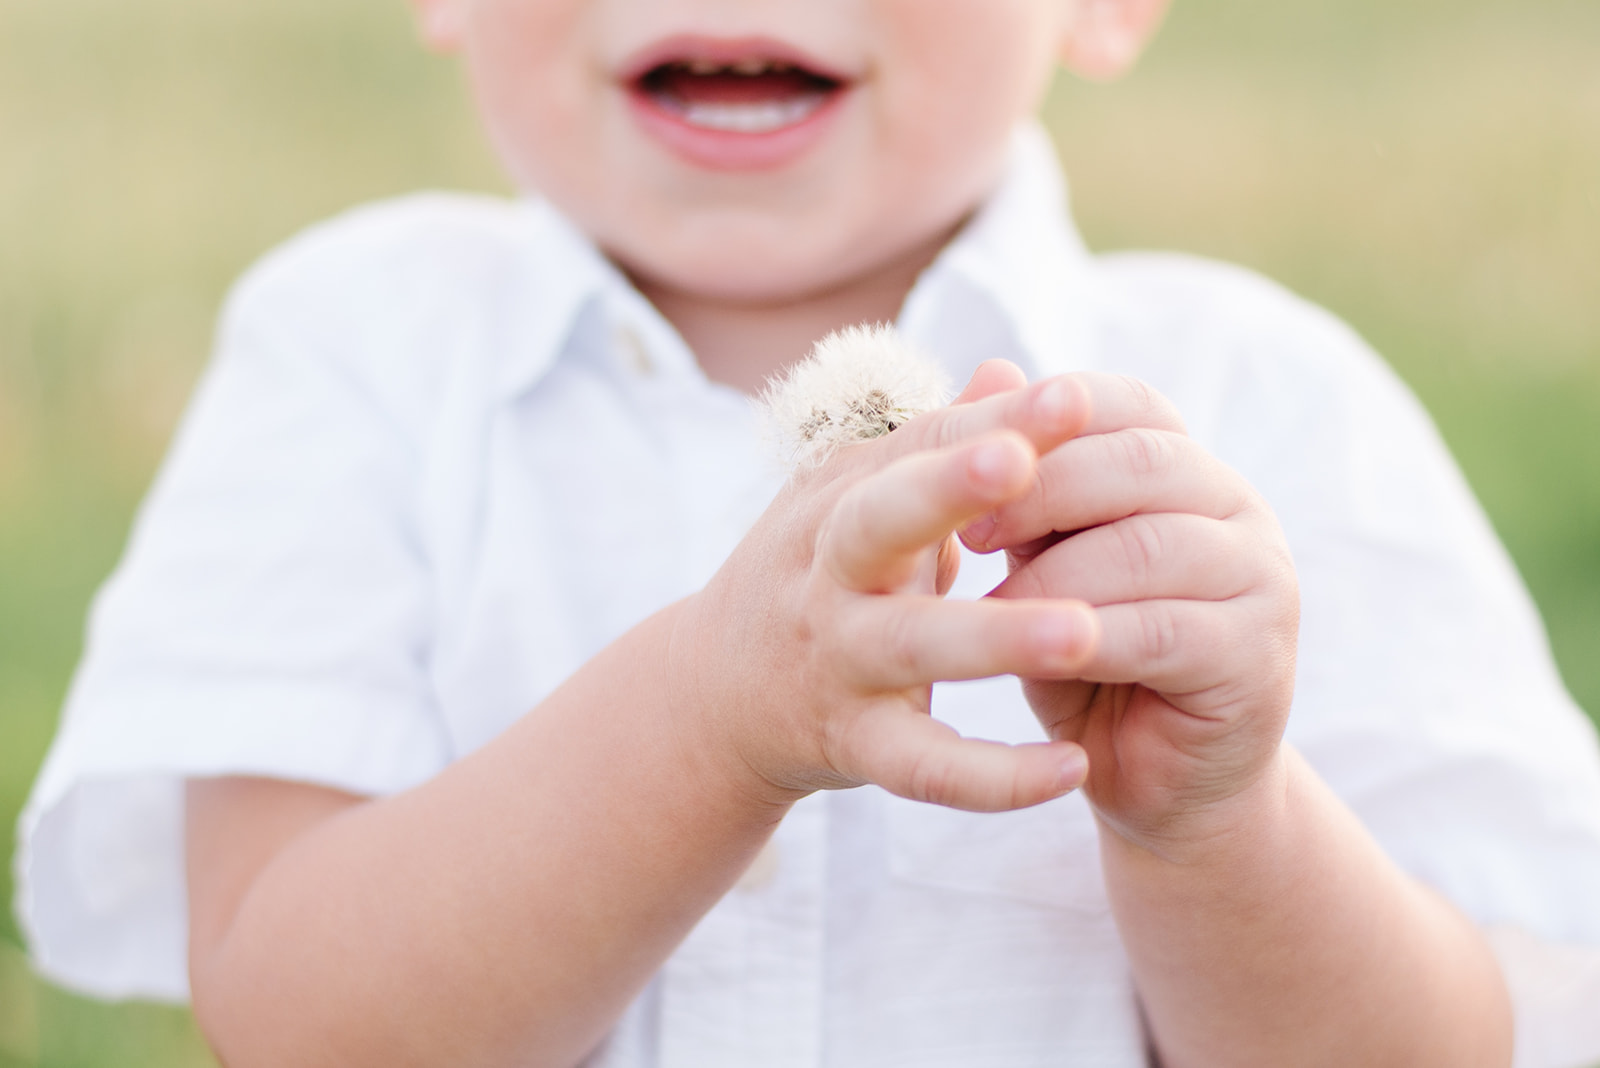 tiny baby hands detailed photography. baby holding dandelion flower.